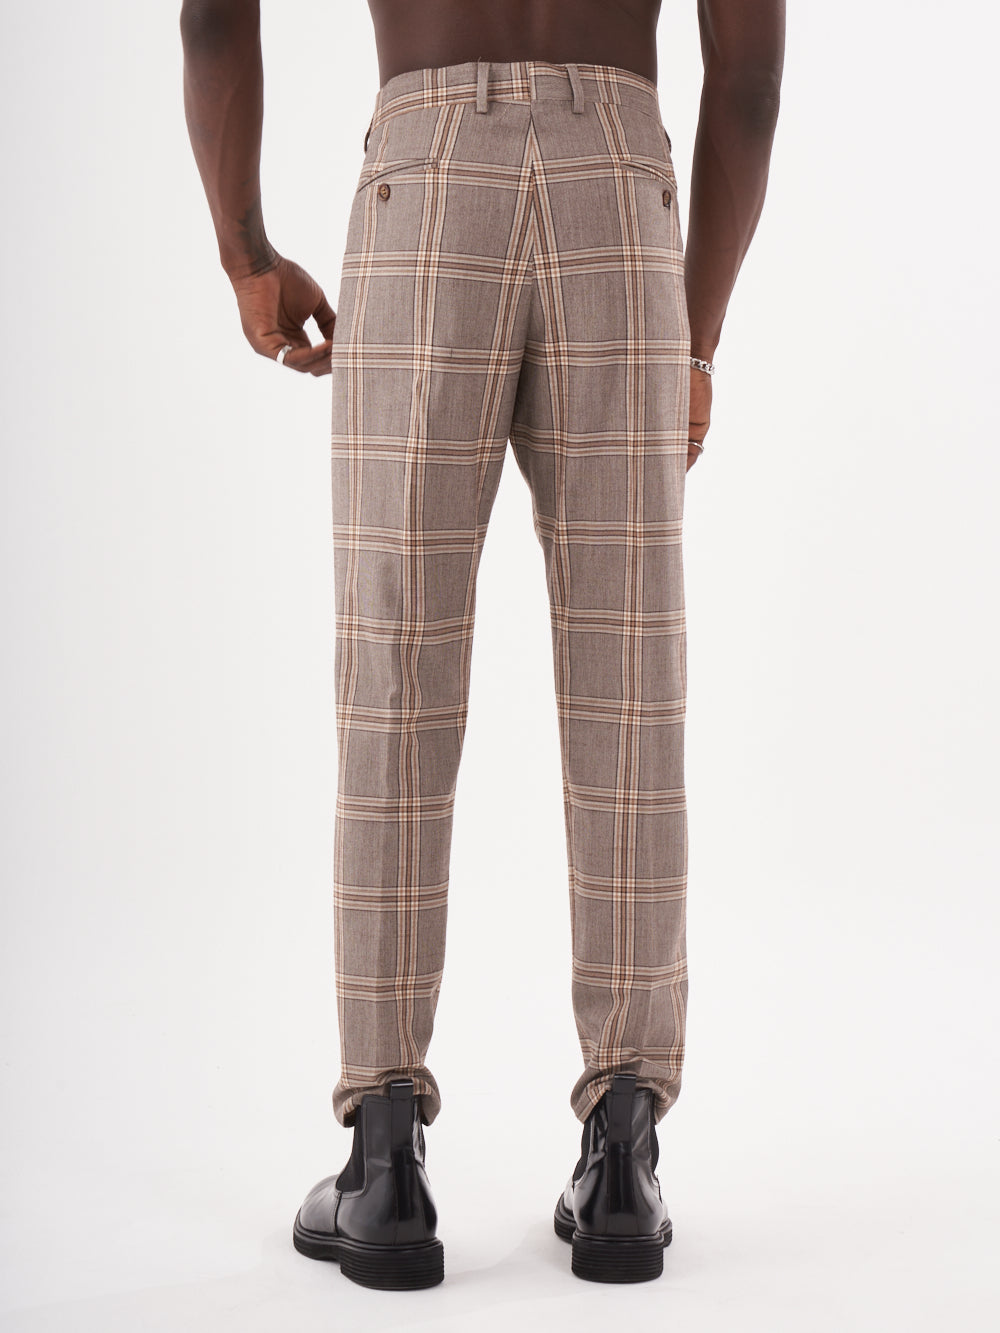 The back view of a man wearing ROOK PANTS in brown checkered trousers.